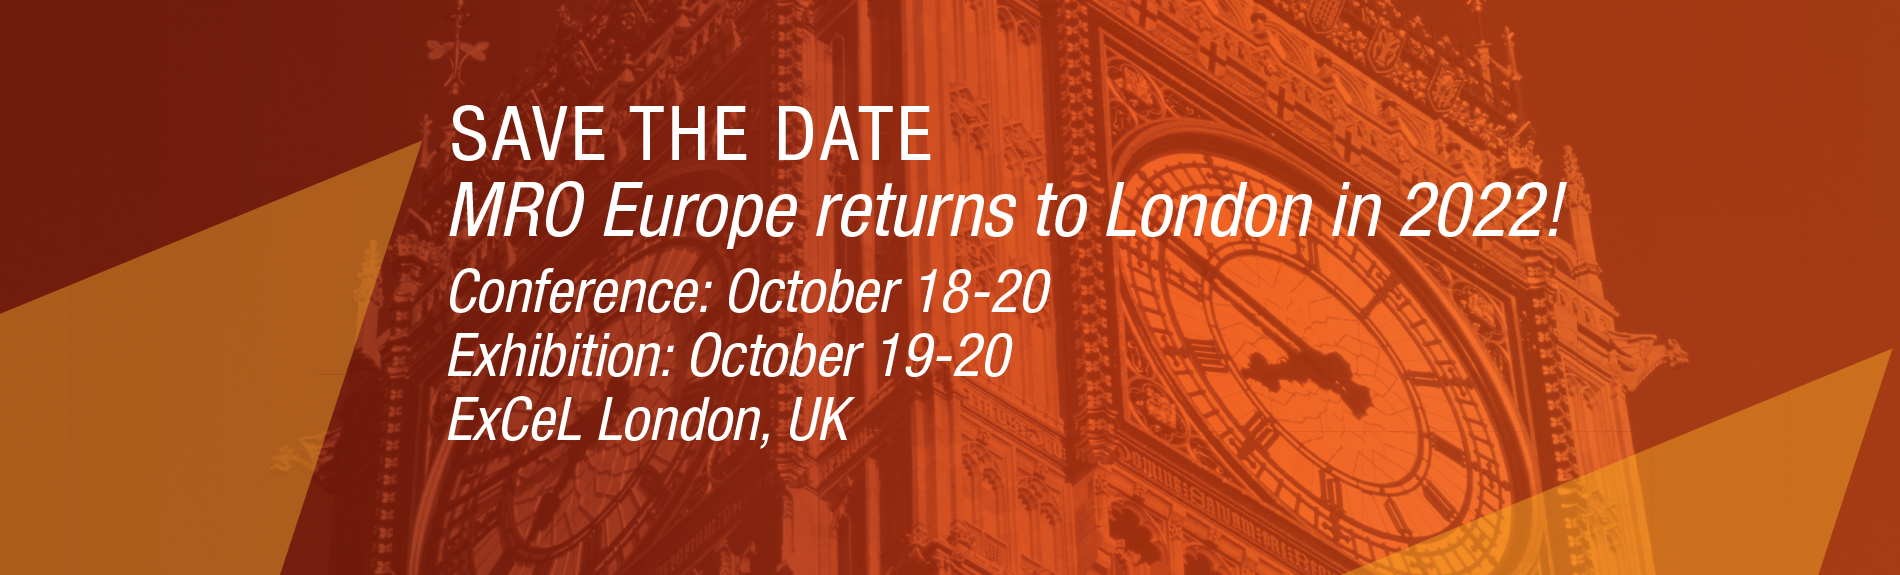 Save the Date MRO Europe 2022